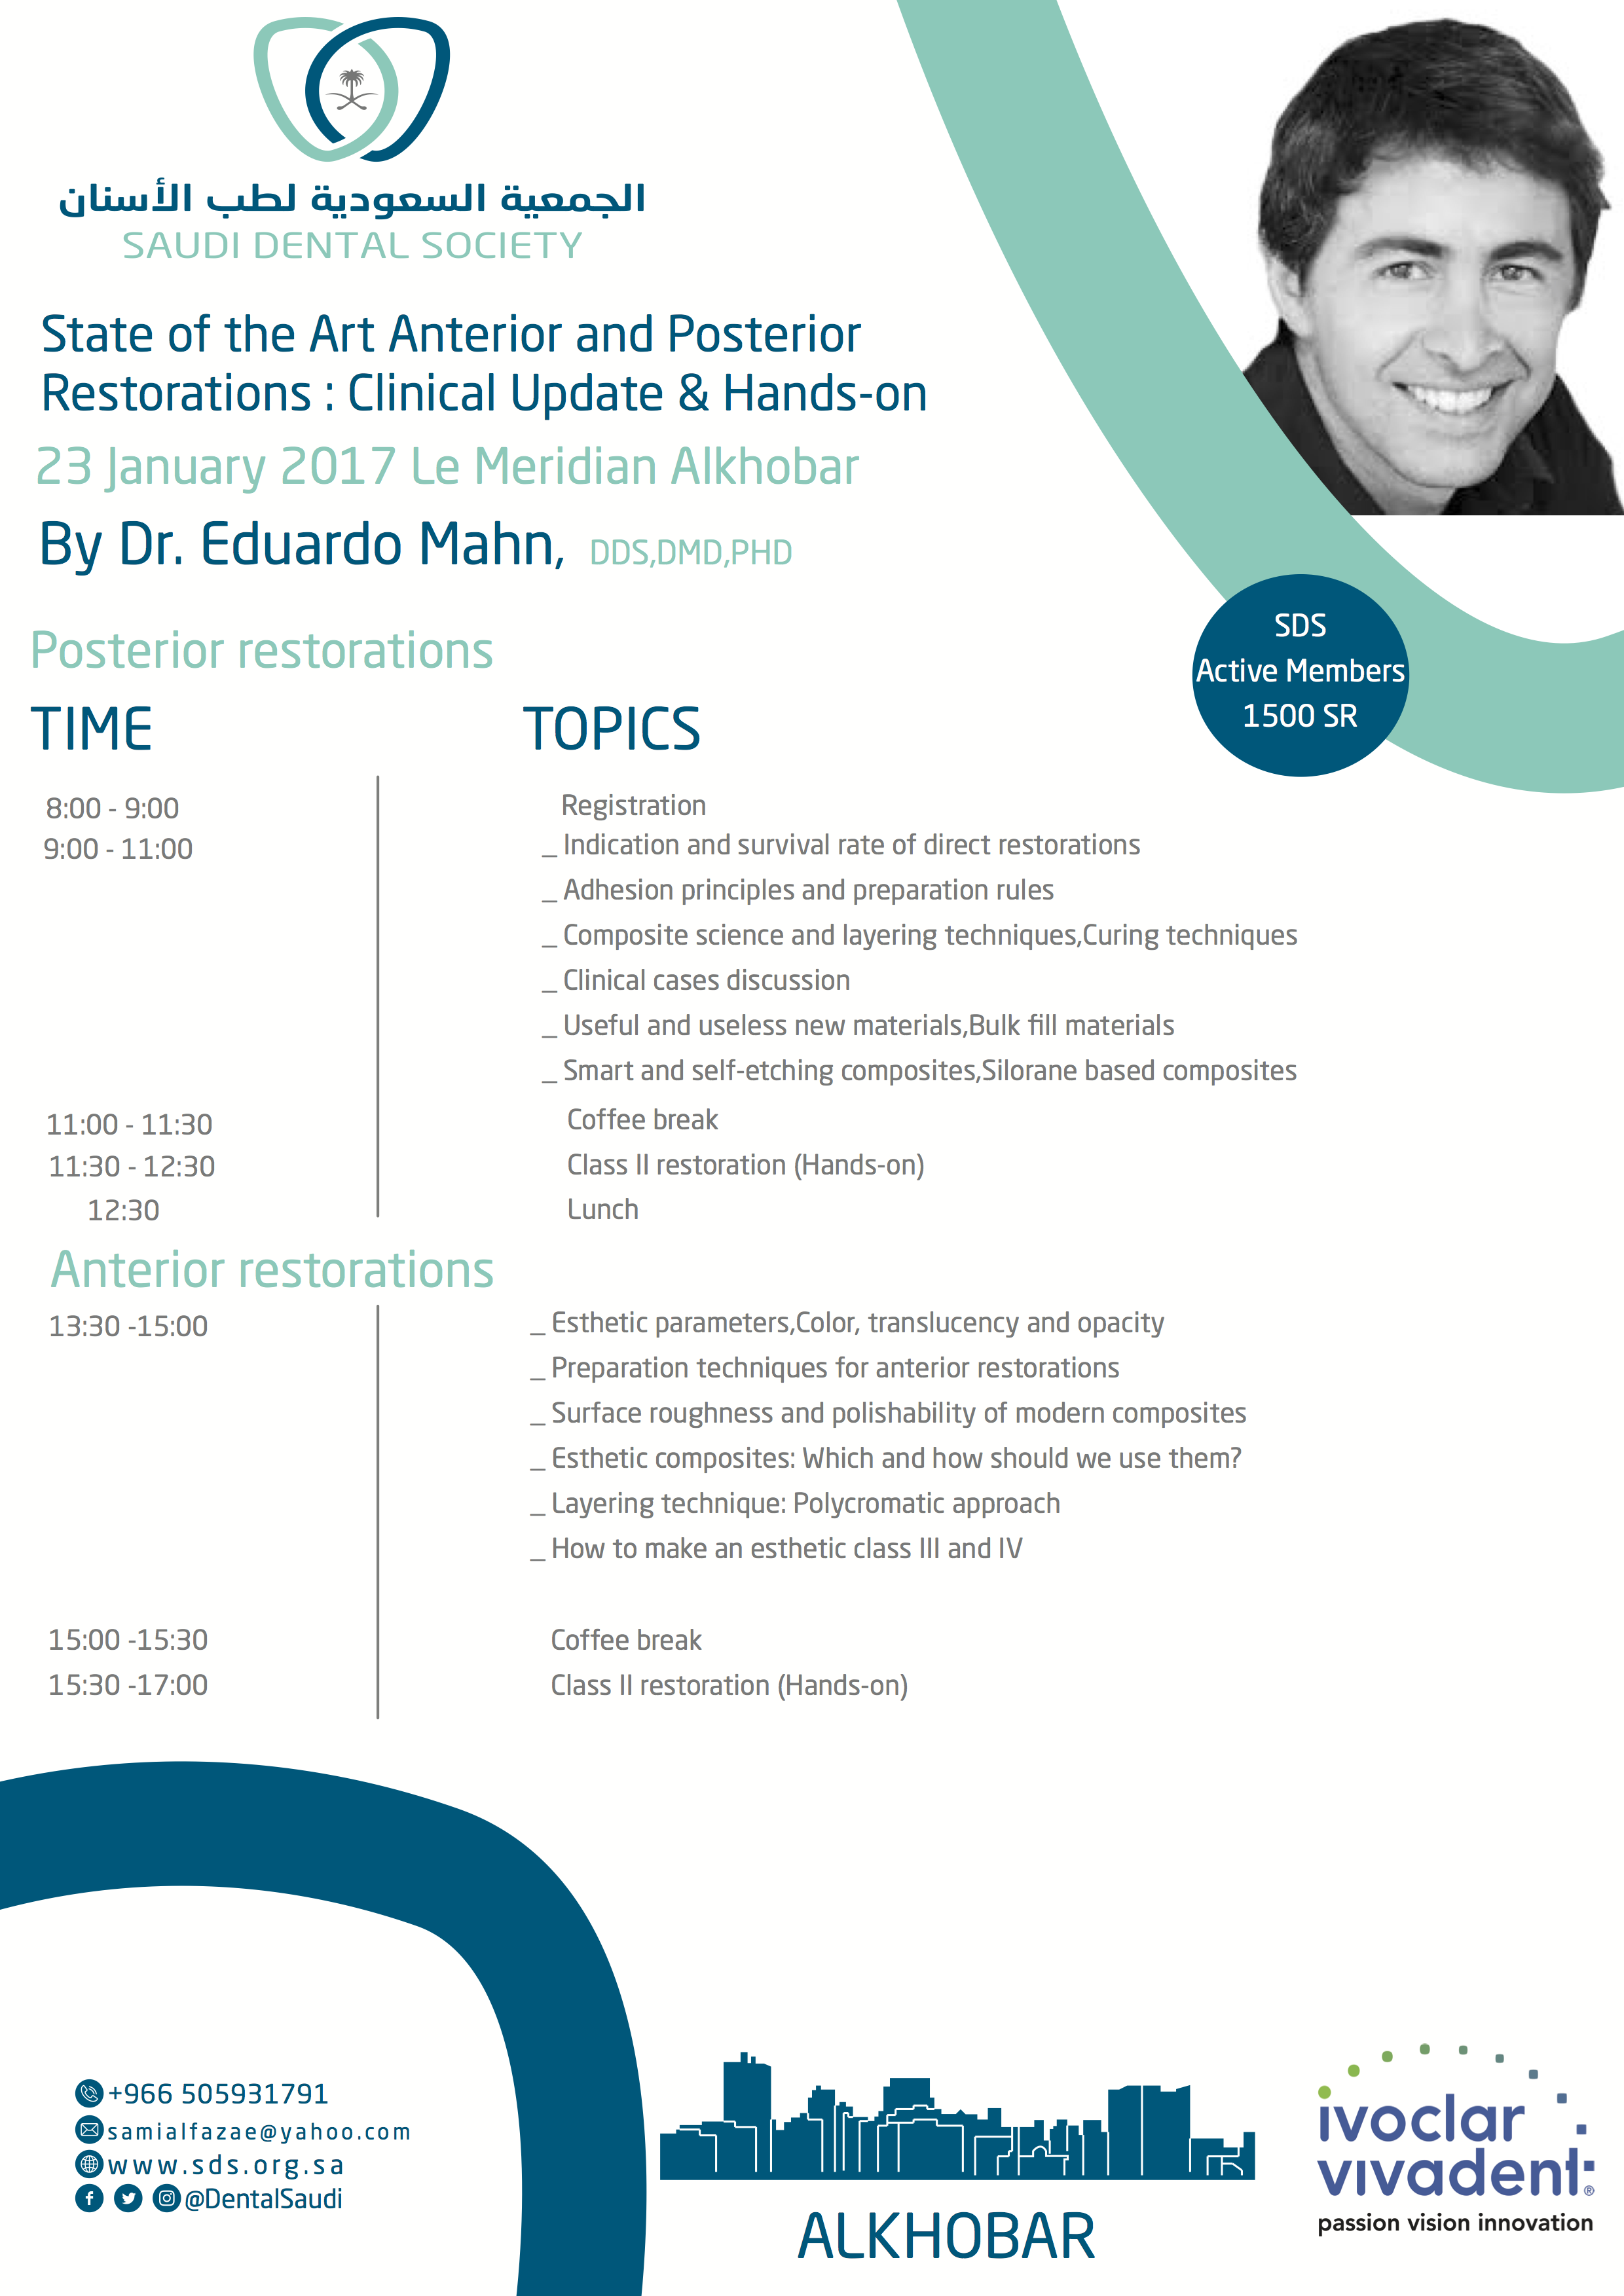 State of the Art Anterior and Posterior Restorations : Clinical Update & Hands-on